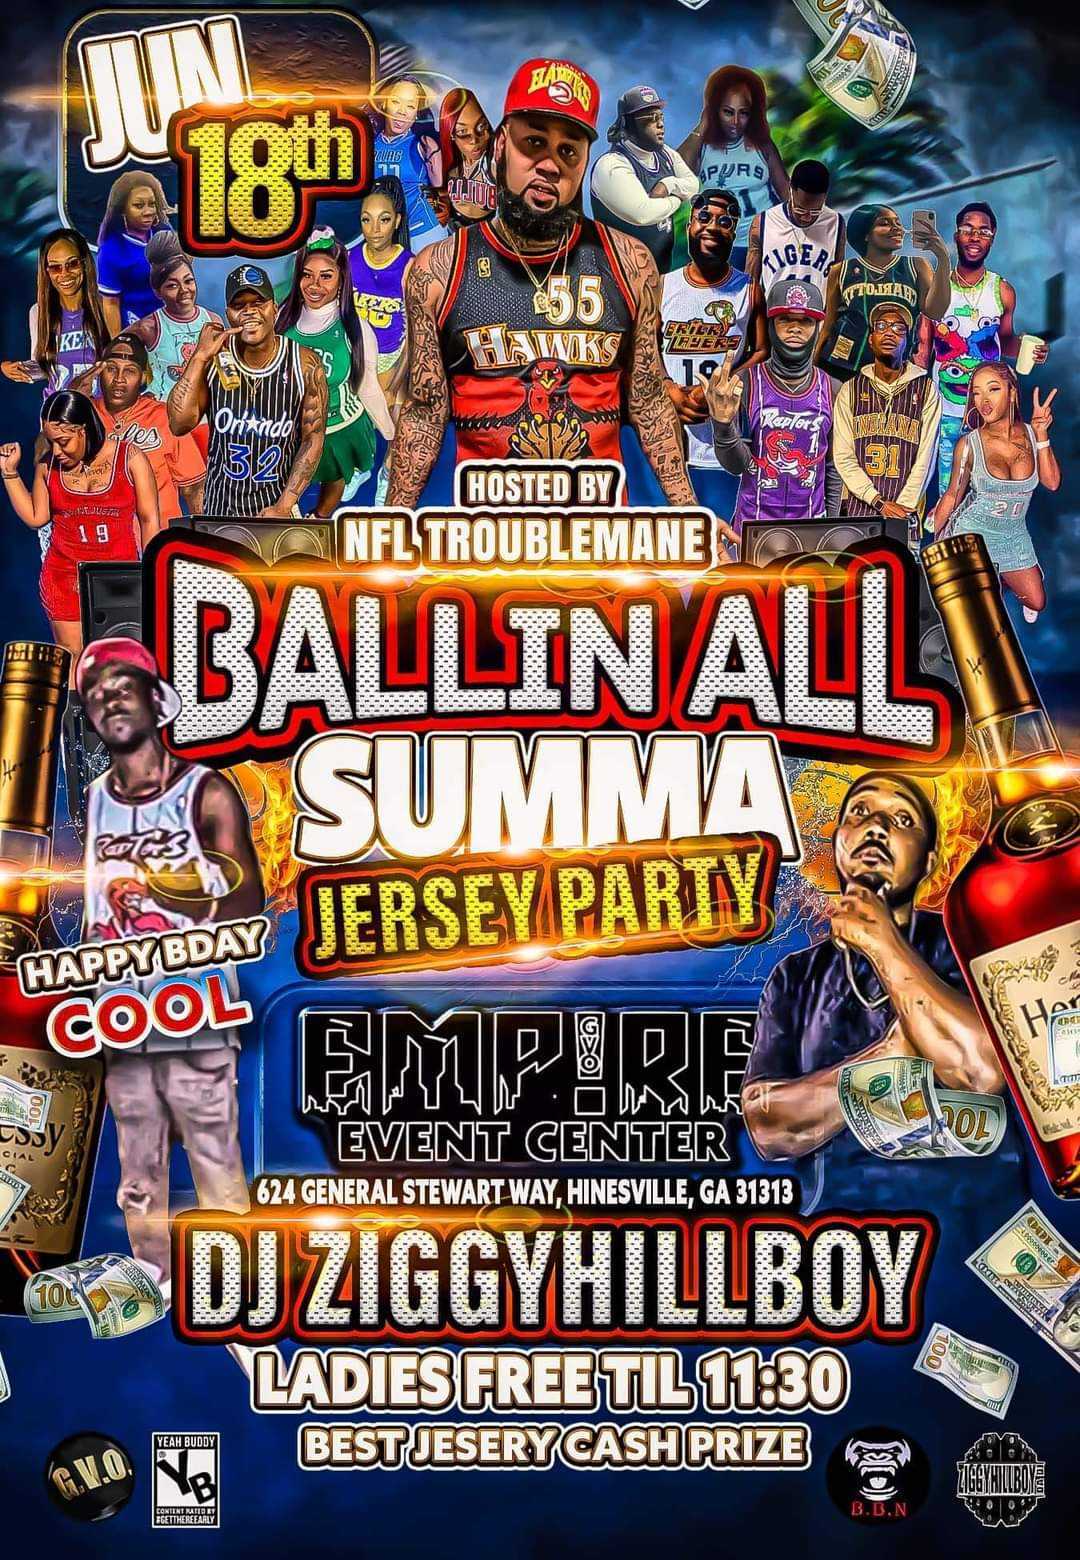 Jersey Party at Empire Event Center